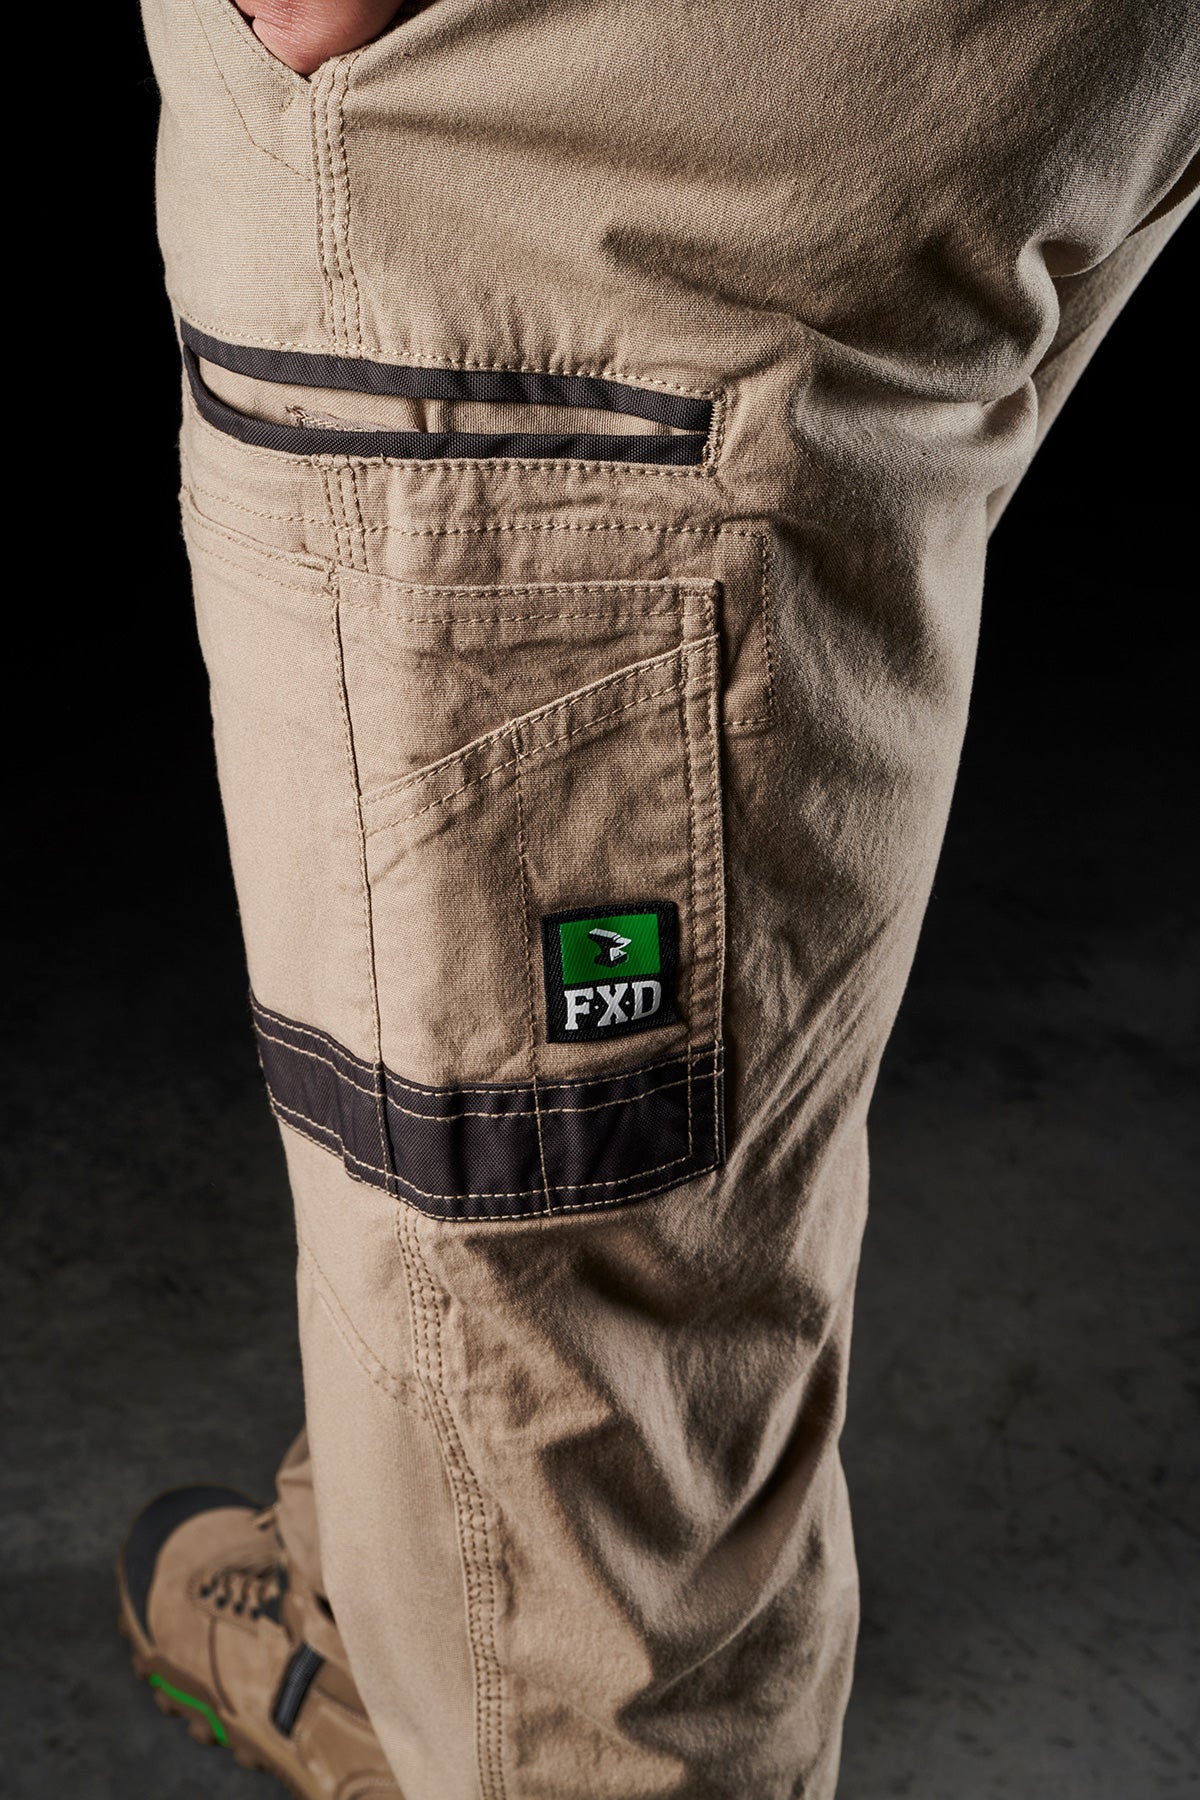 FXD WP 3 Stretch Work Pant Cargo – THE BOOTS CLOTHES SAFETY STORE